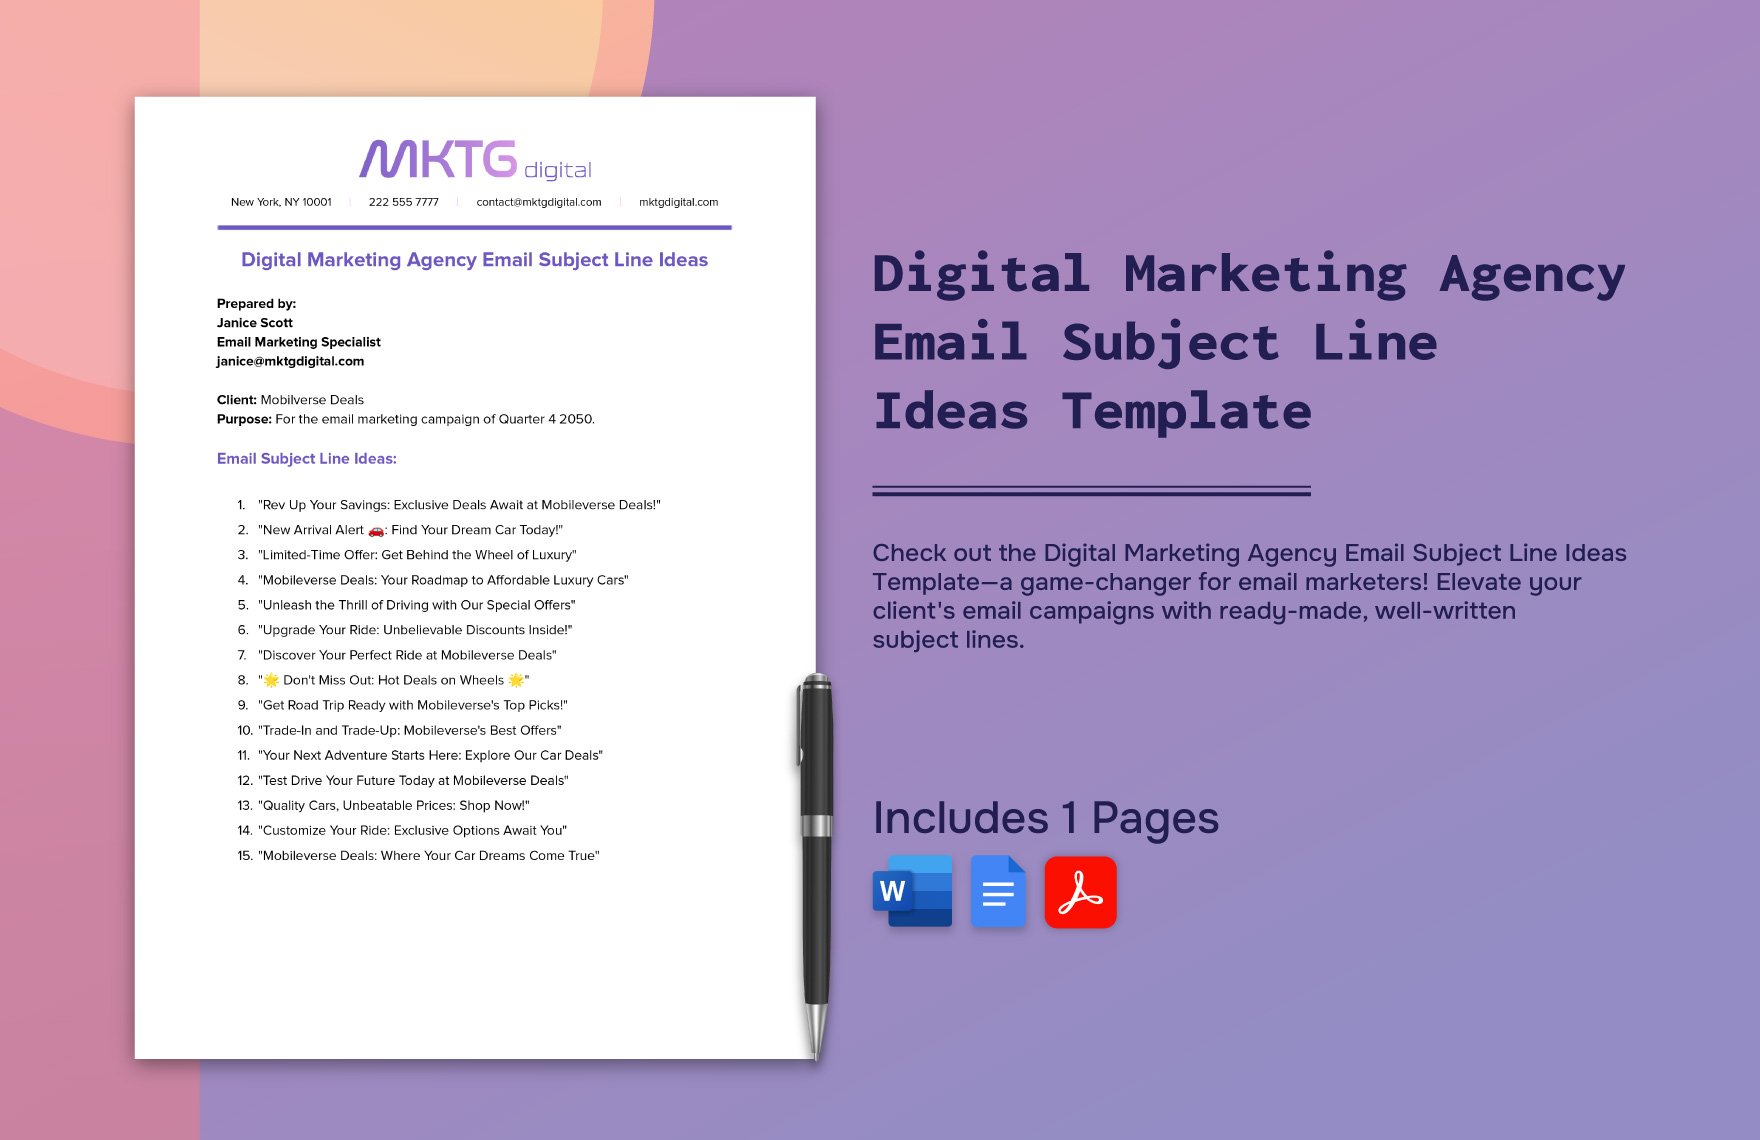 Free Digital Marketing Agency Email Subject Line Ideas Template